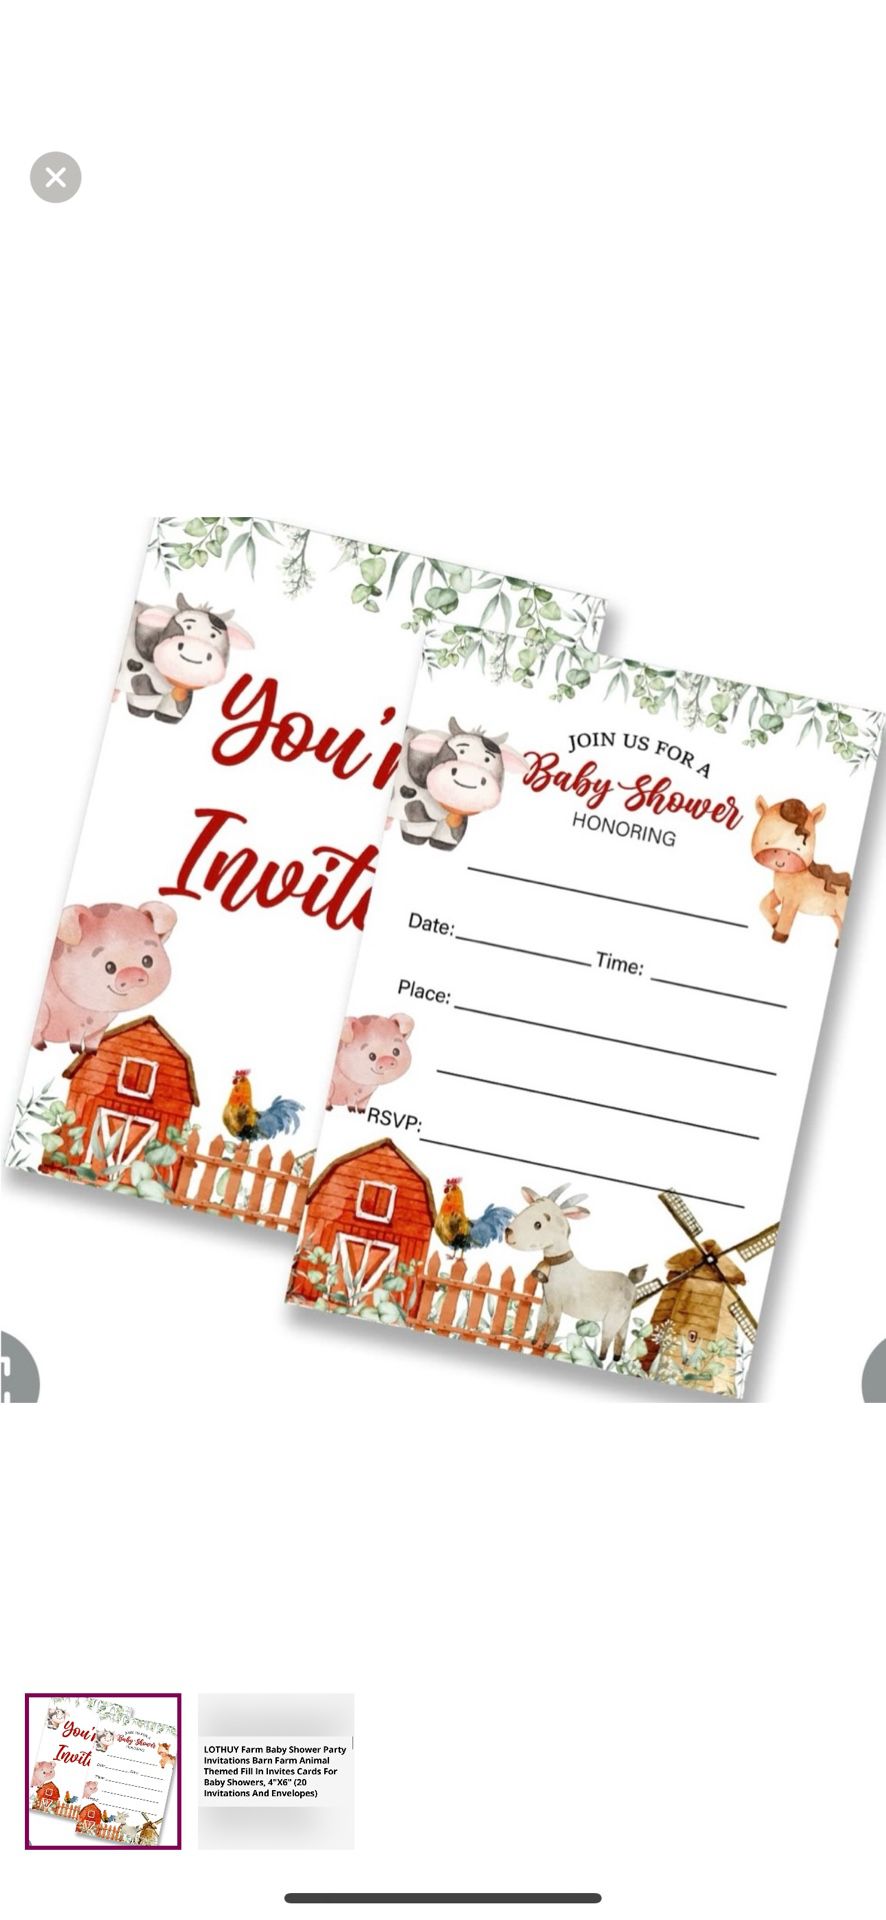 Party Invitations 3 Packs 1 Price $15